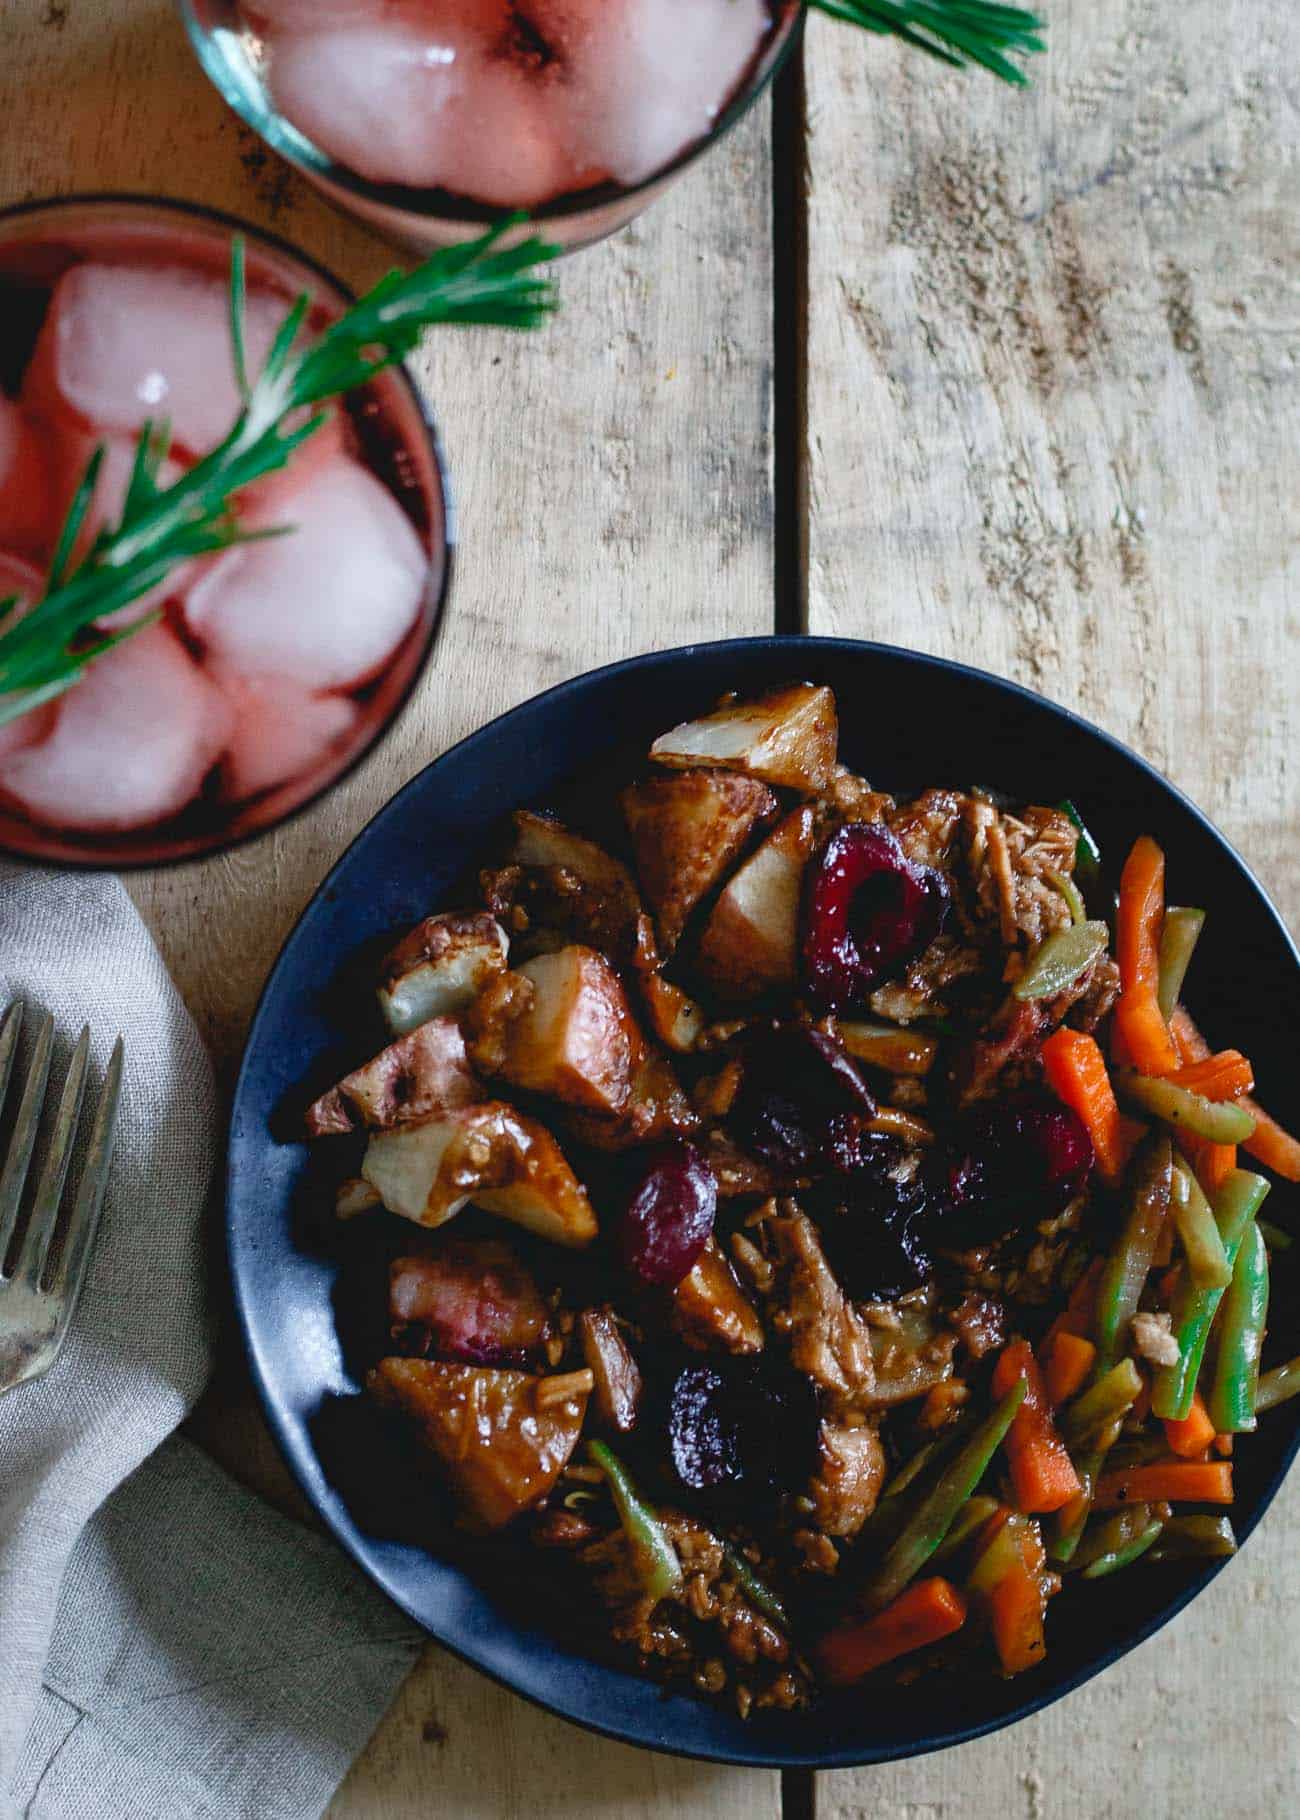 This tart cherry red wine spritzer is the perfect accompaniment to this cherry port pork dinner.